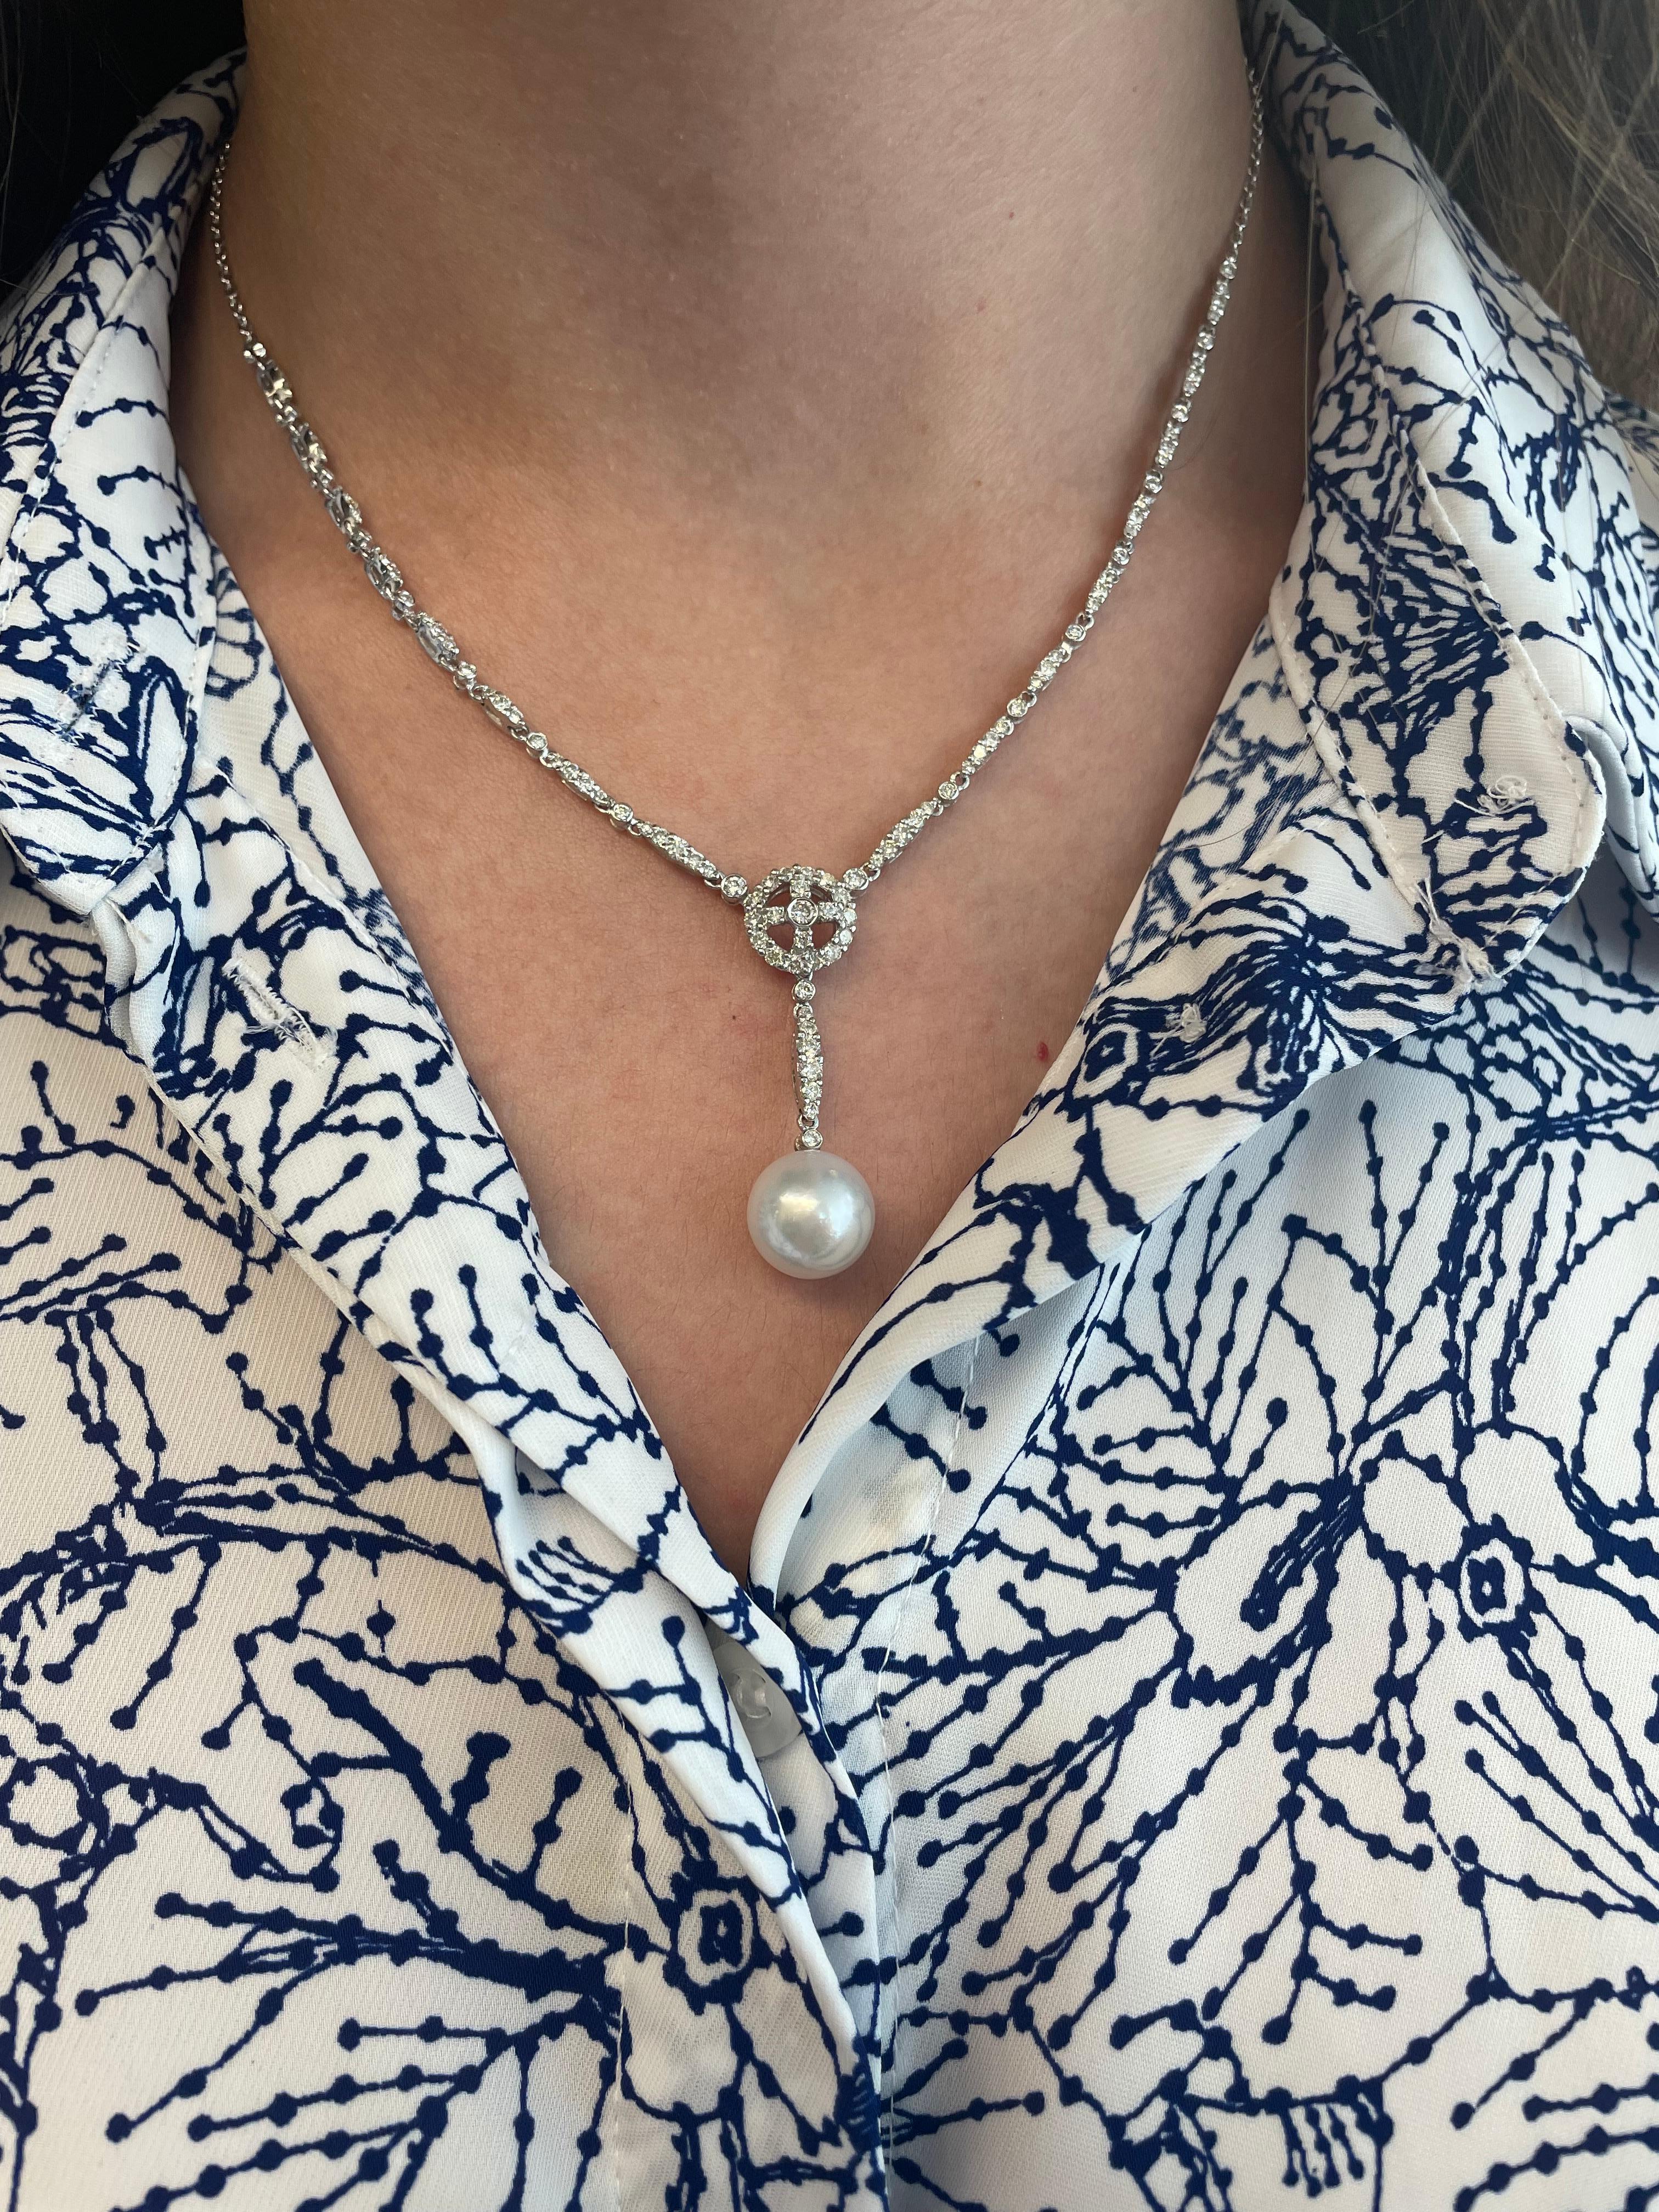 Art Deco inspired diamond and pearl drop necklace.
101 round diamonds, 2.12 carats. Approximately H/I color and SI clarity. 18-karat white gold.
Accommodated with an up to date appraisal by a GIA G.G. upon request. please contact us with any